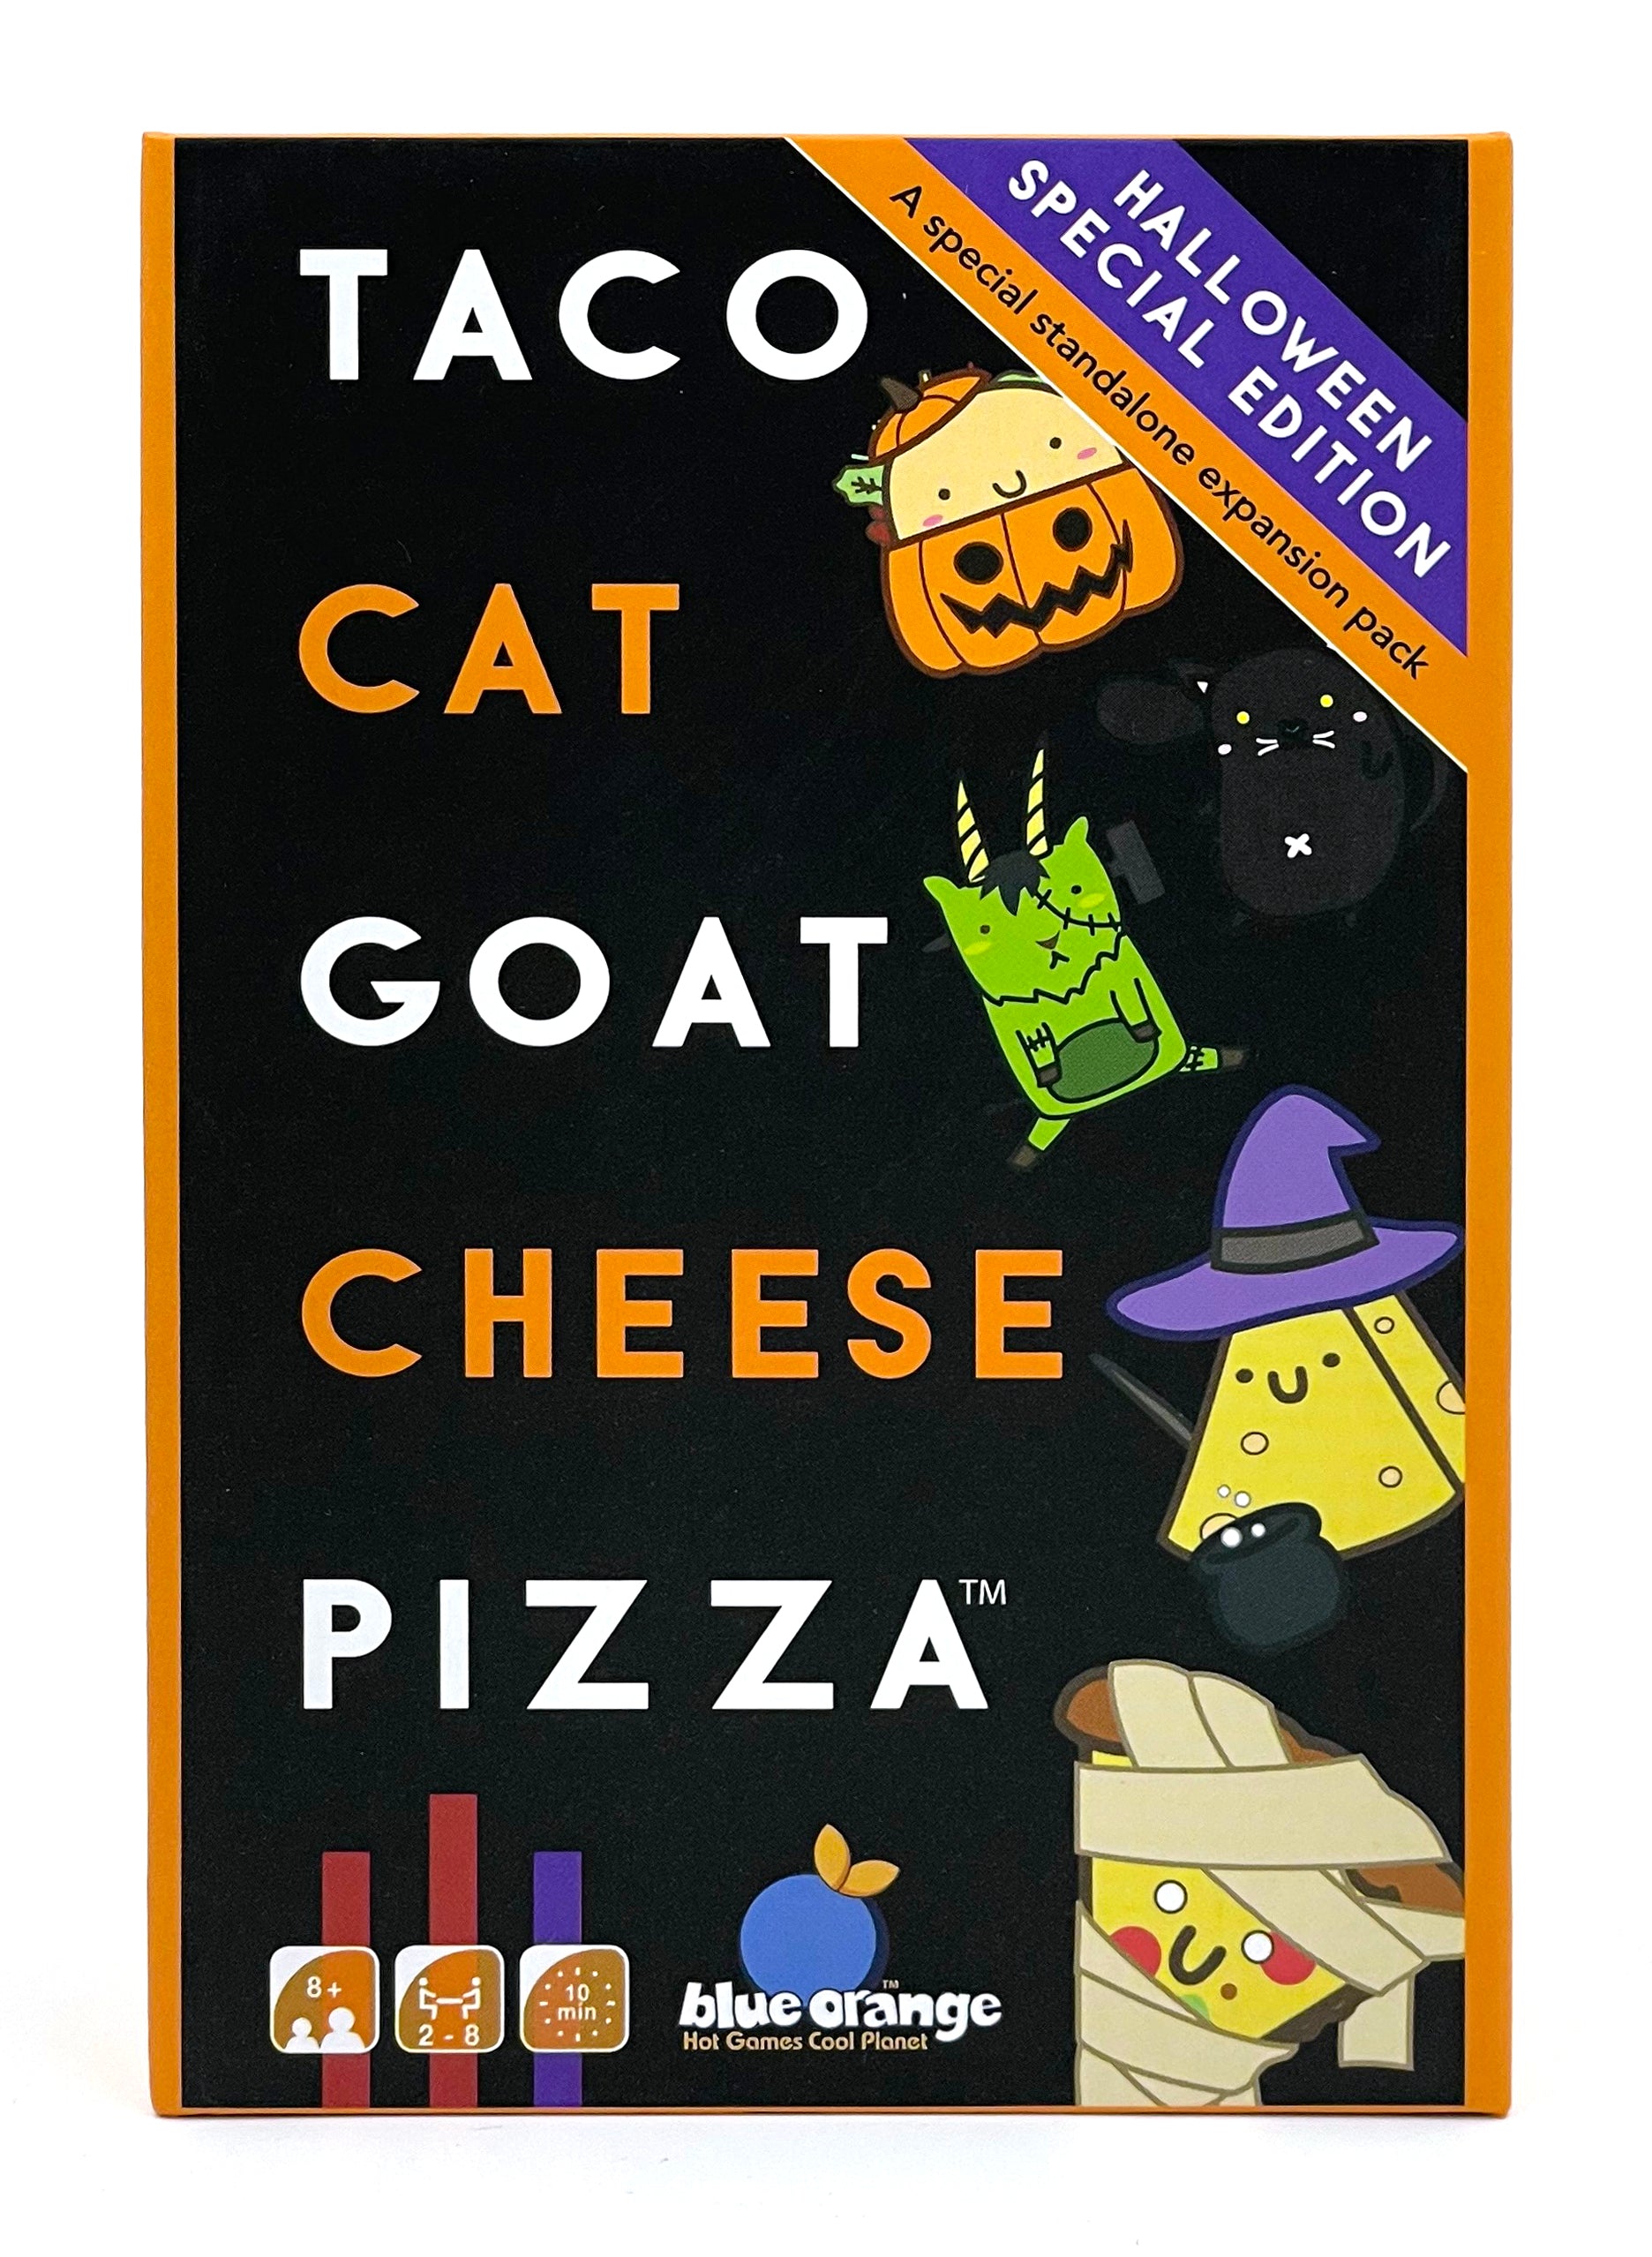 SPOOKY Edition - Taco Cat Goat Cheese Pizza